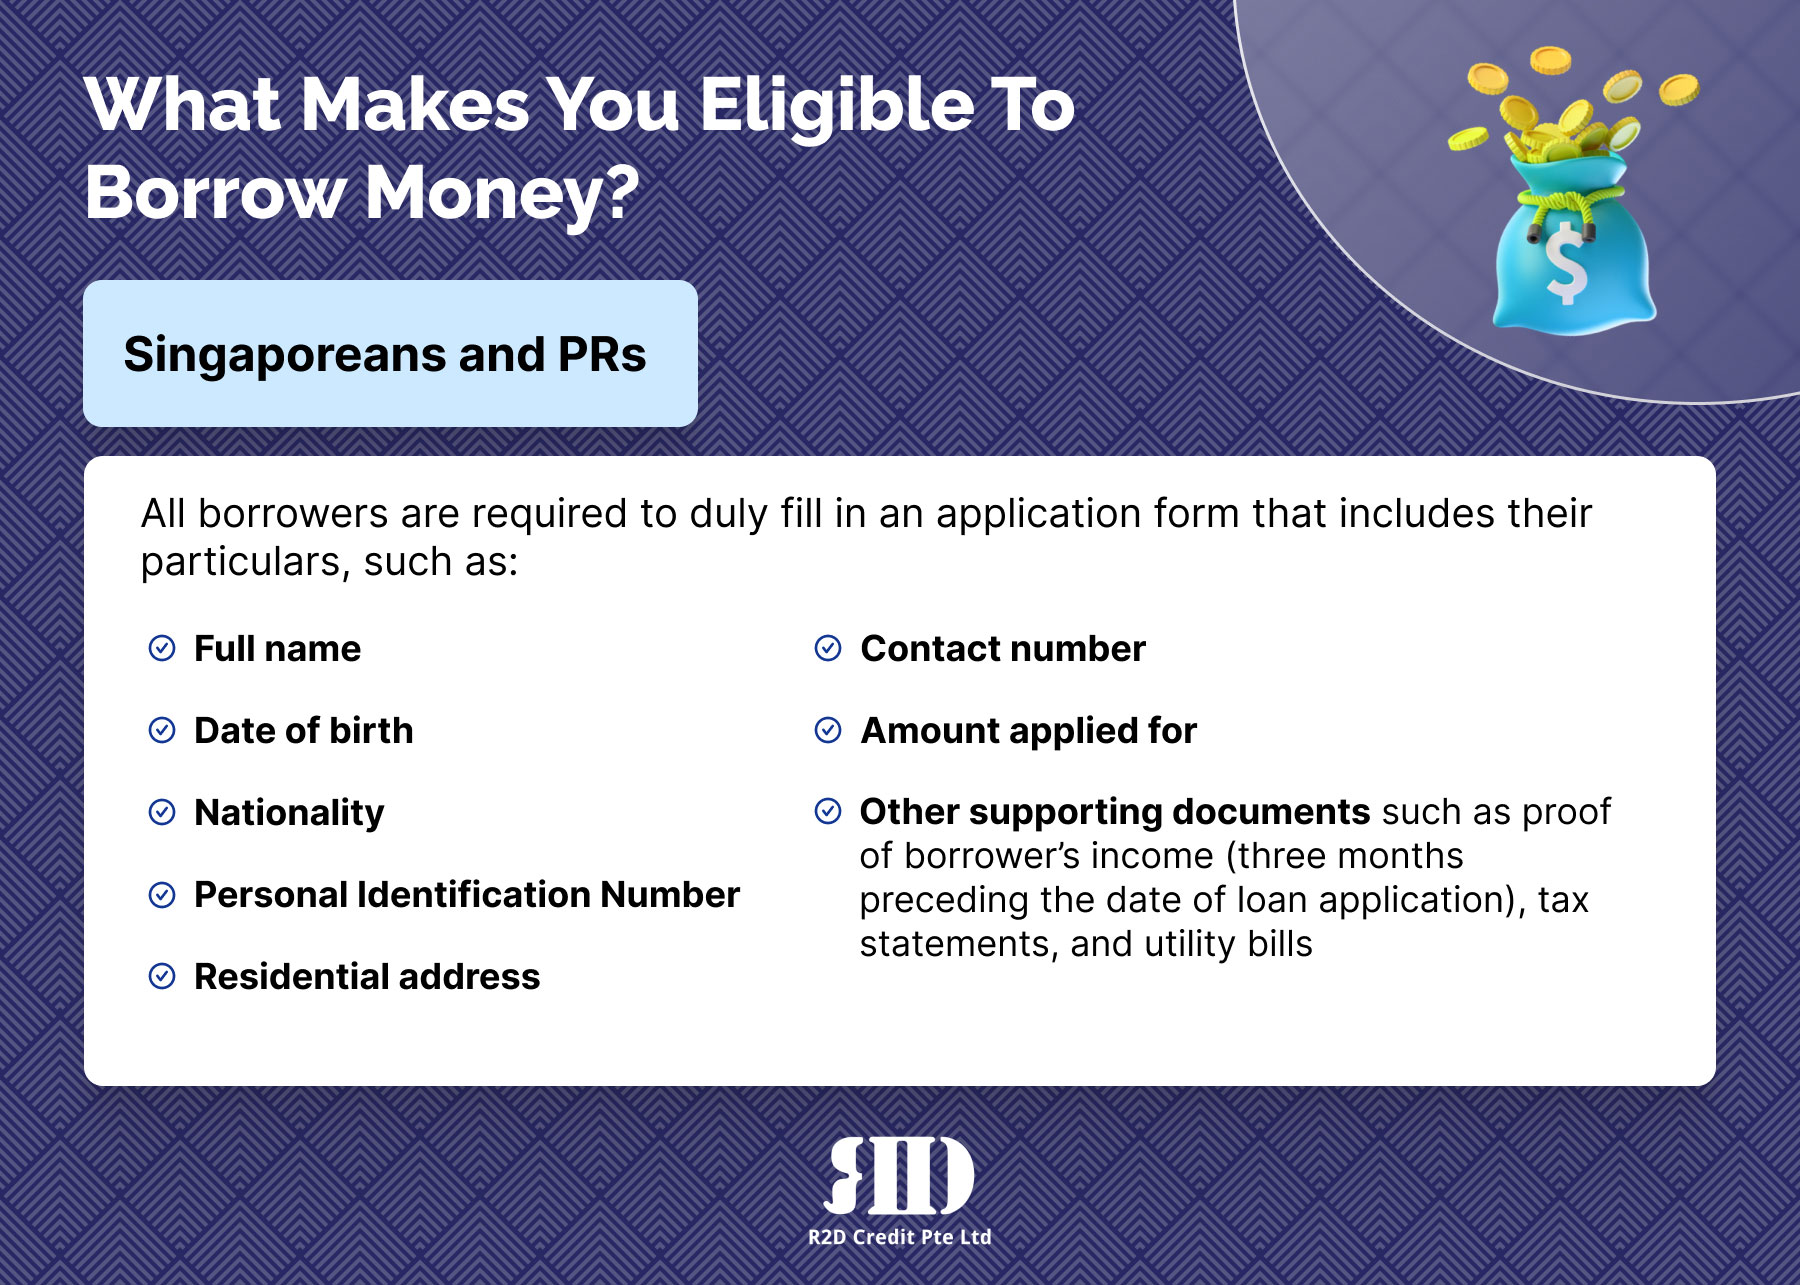 A simple infographic listing the loan application requirements for a Singaporean